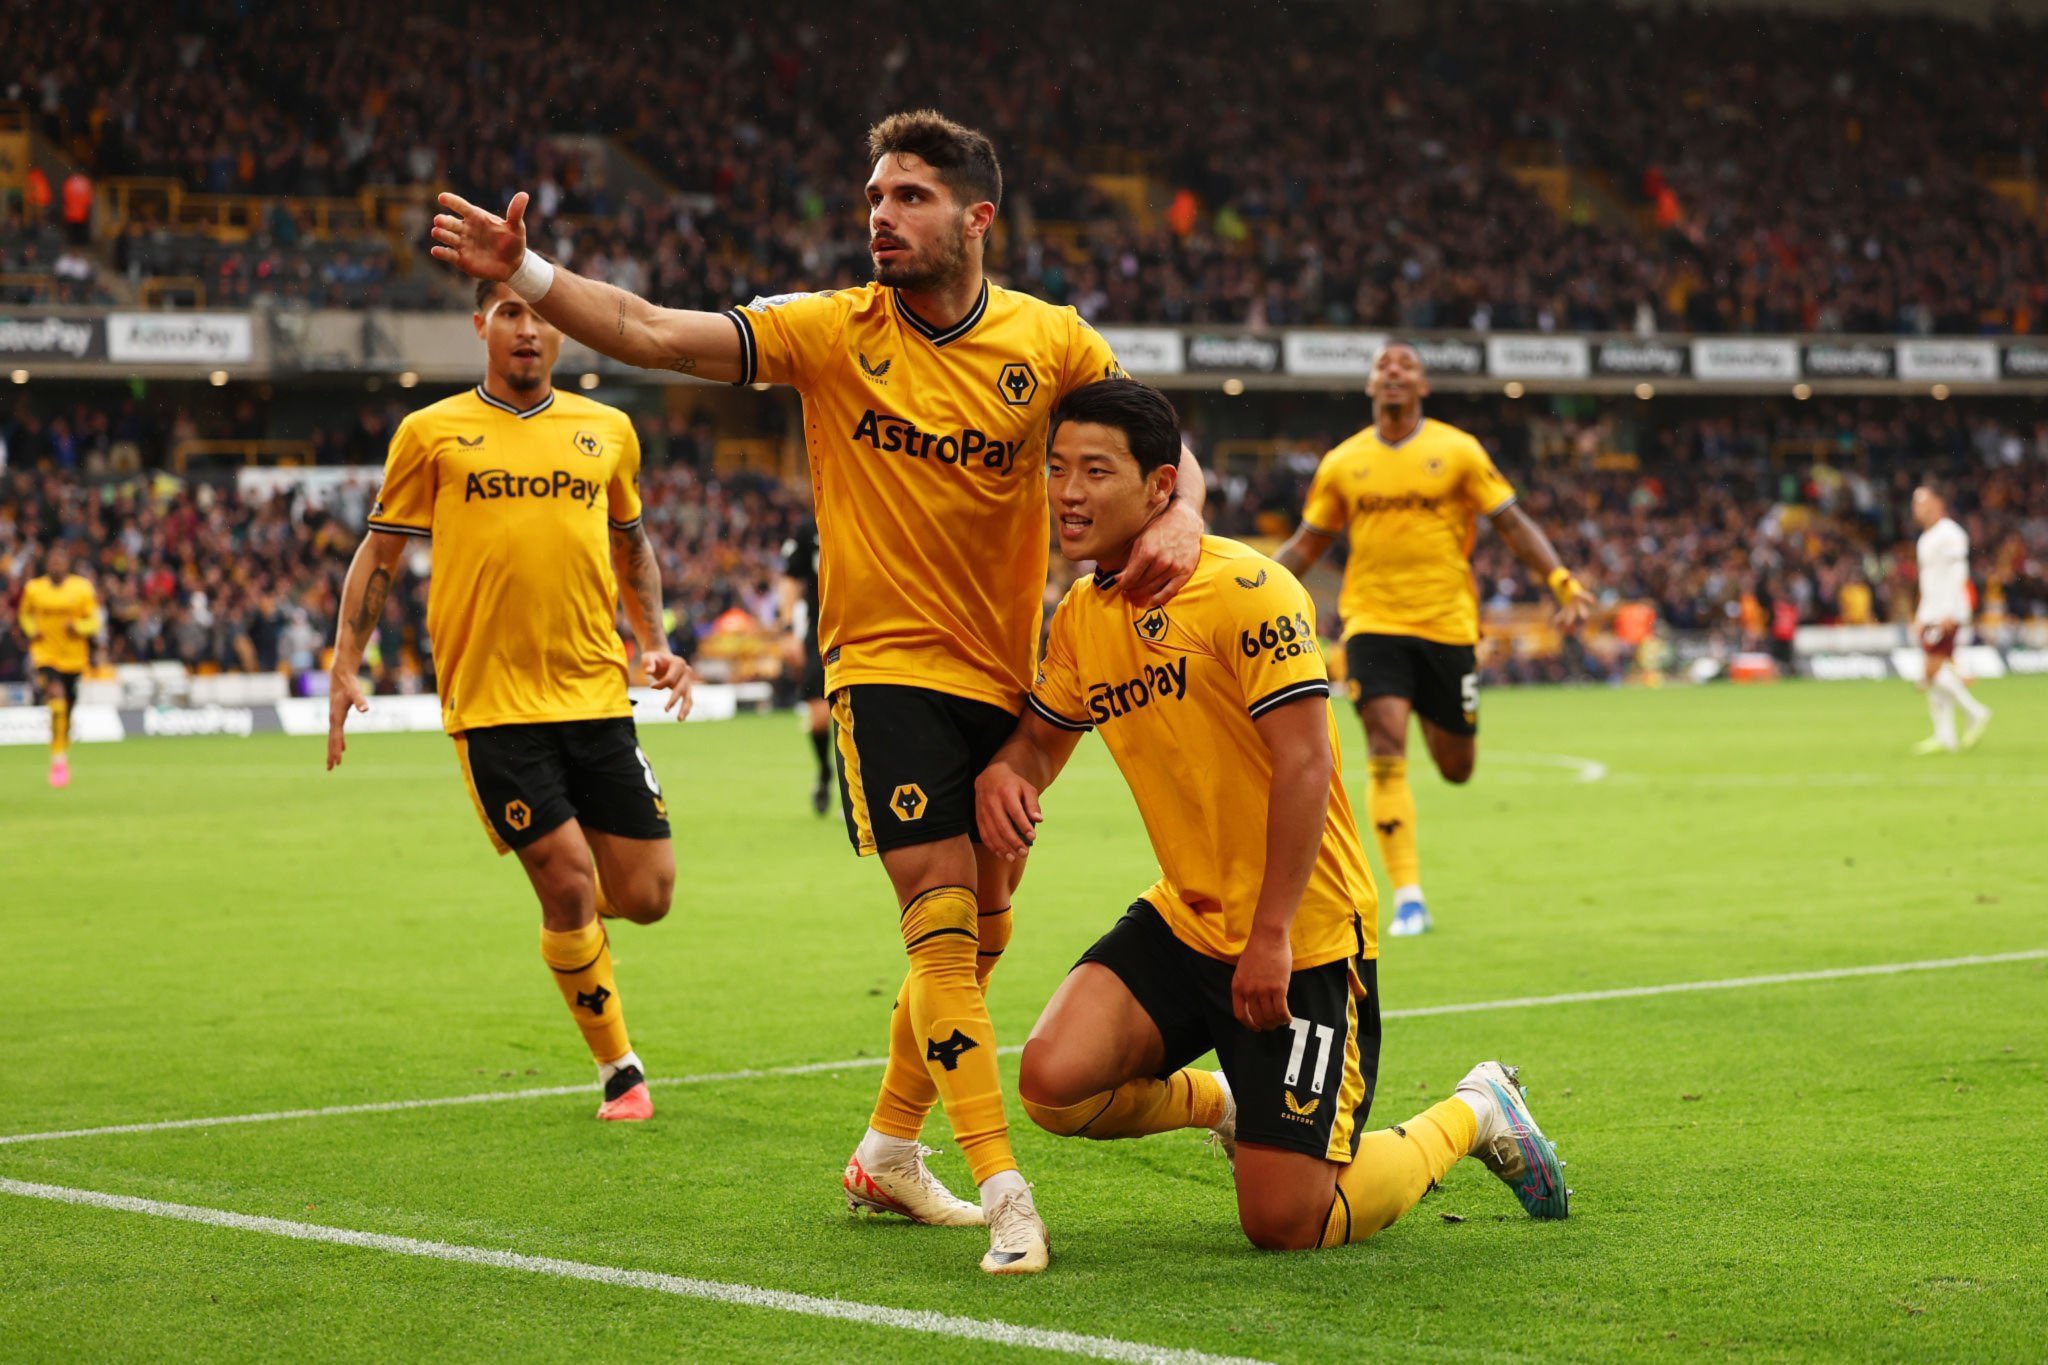 Wolves 2 - 1 Manchester City